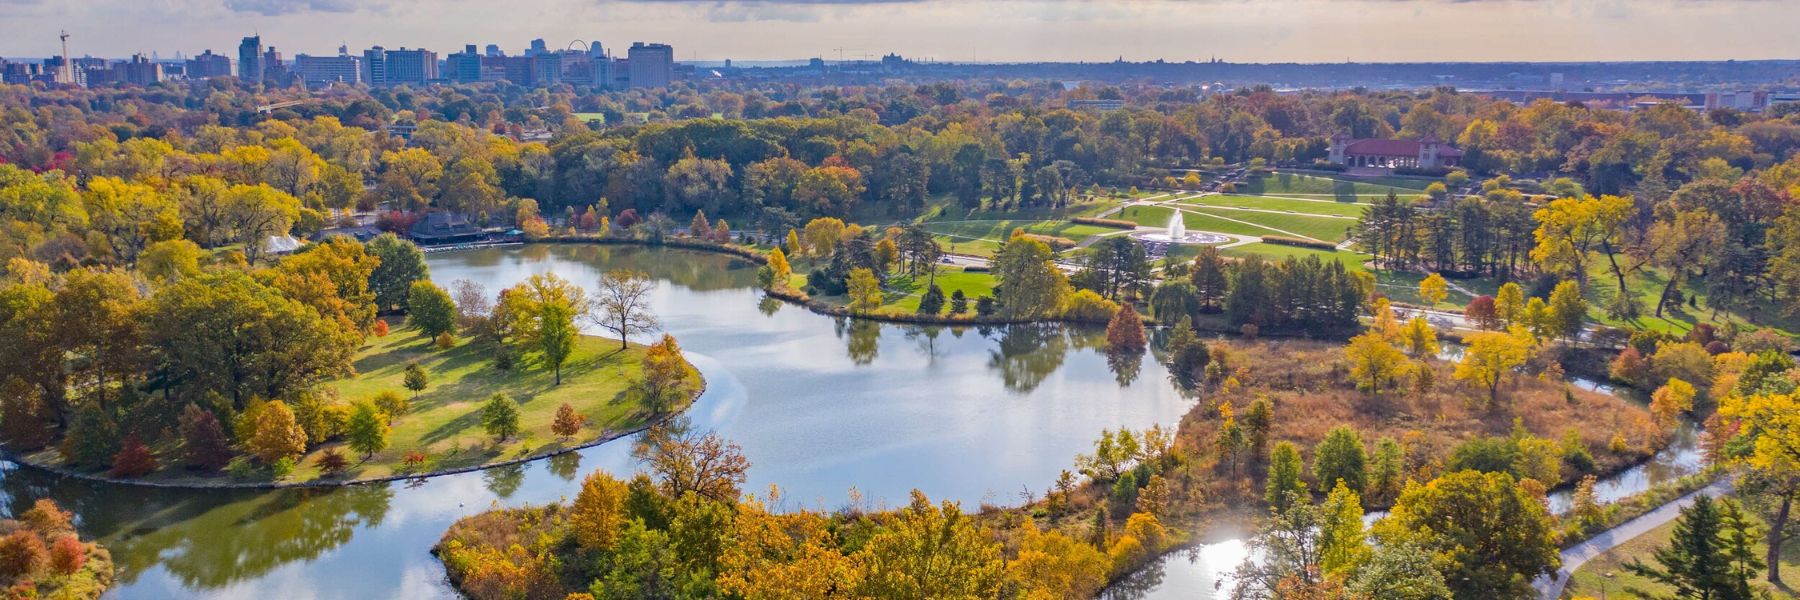 Forest Park is one of the best places to get outdoors in St. Louis.